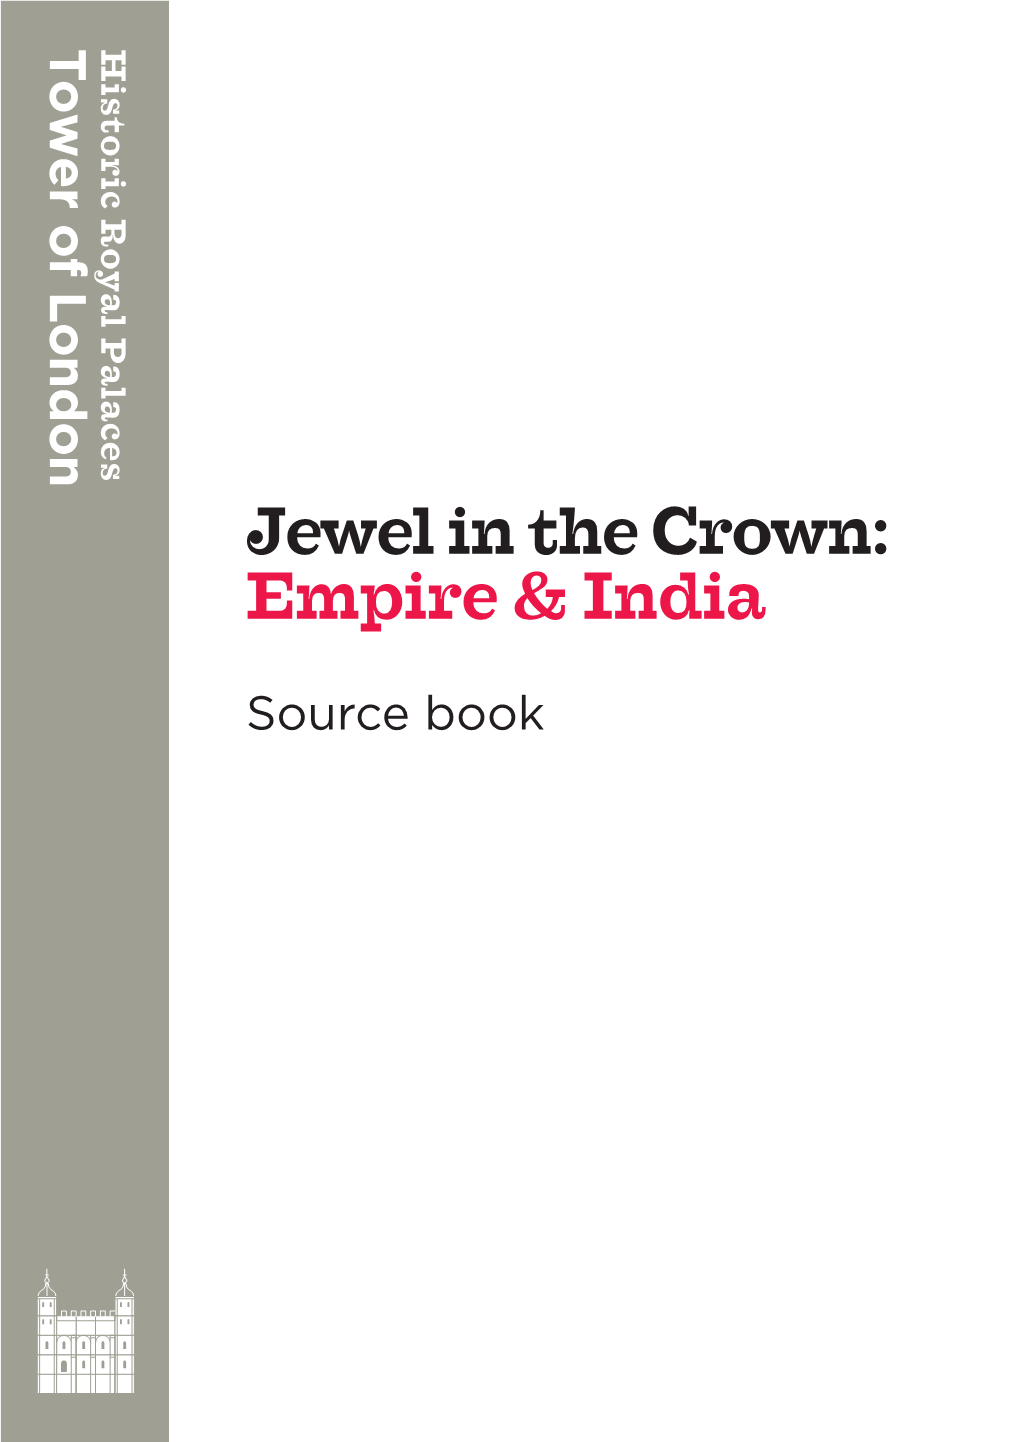 Jewel in the Crown: Empire & India Source Book Visit to the Crown Jewels